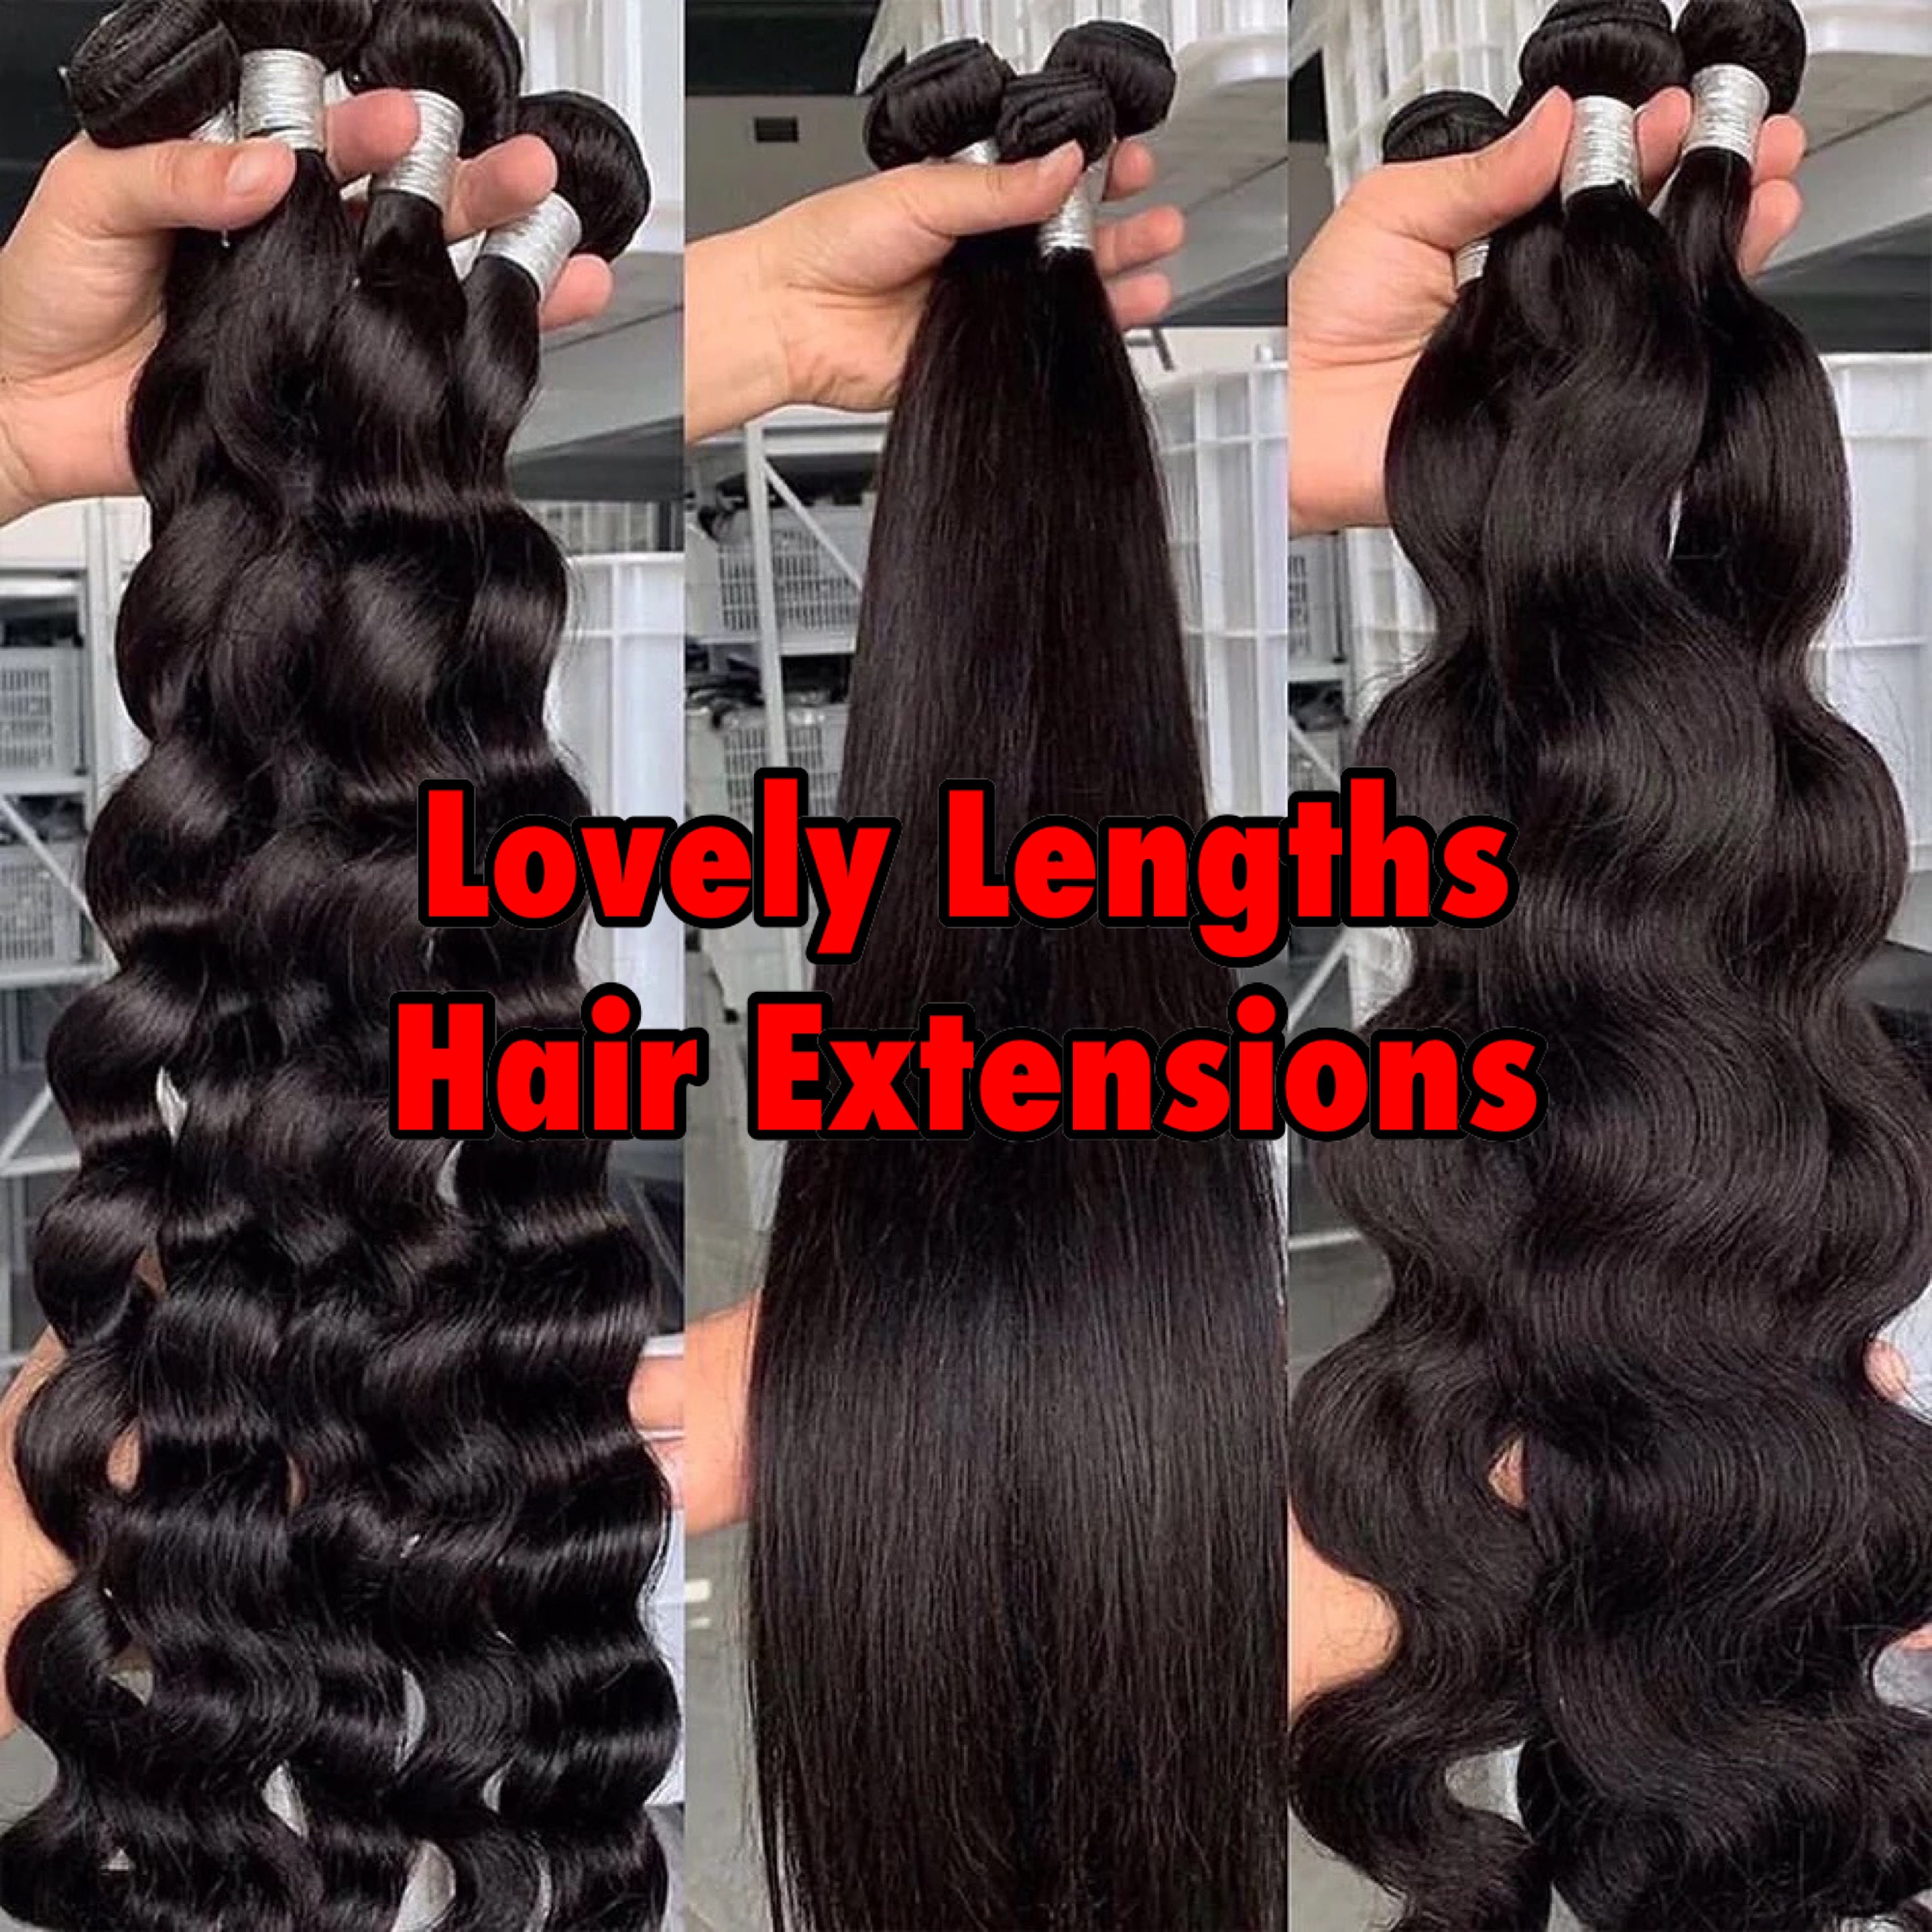 18 Inches Body Wave Brazilian Hair 3 Bundles  Buy Online in South Africa   takealotcom